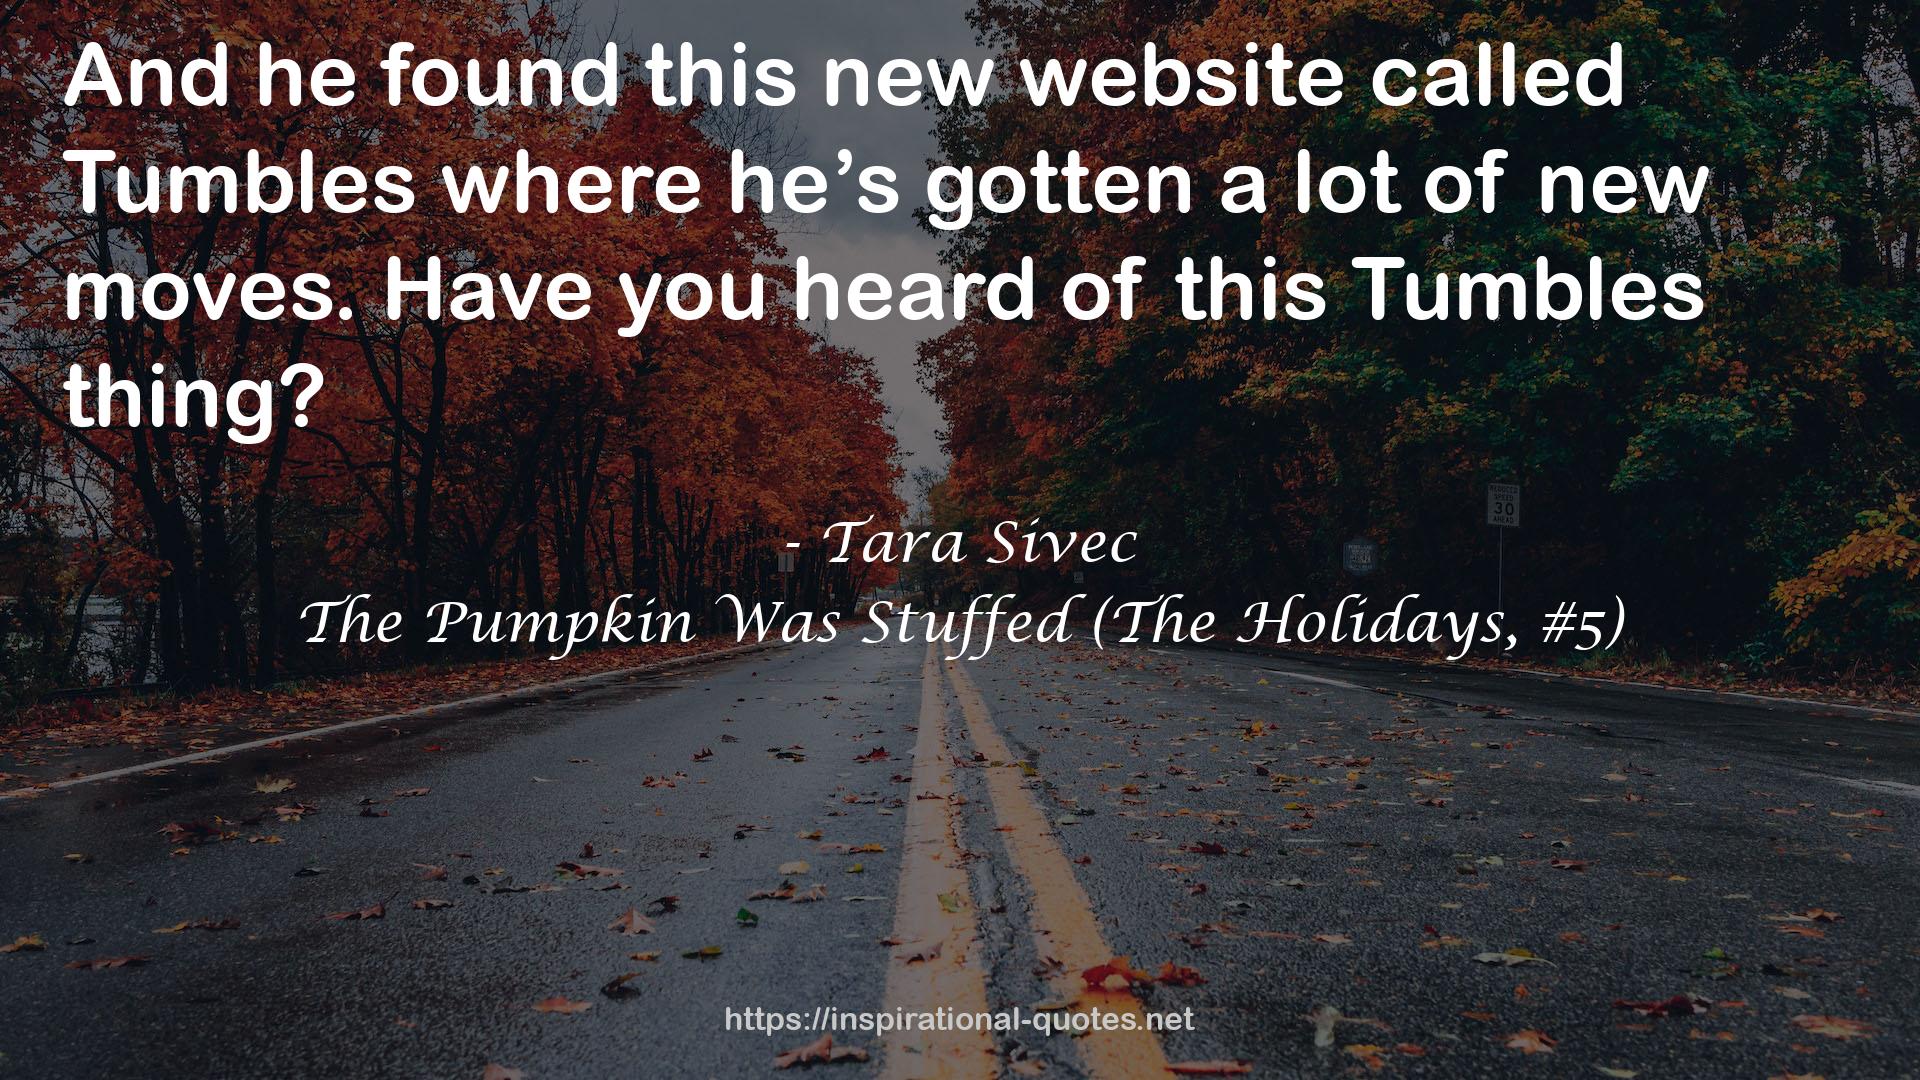 The Pumpkin Was Stuffed (The Holidays, #5) QUOTES